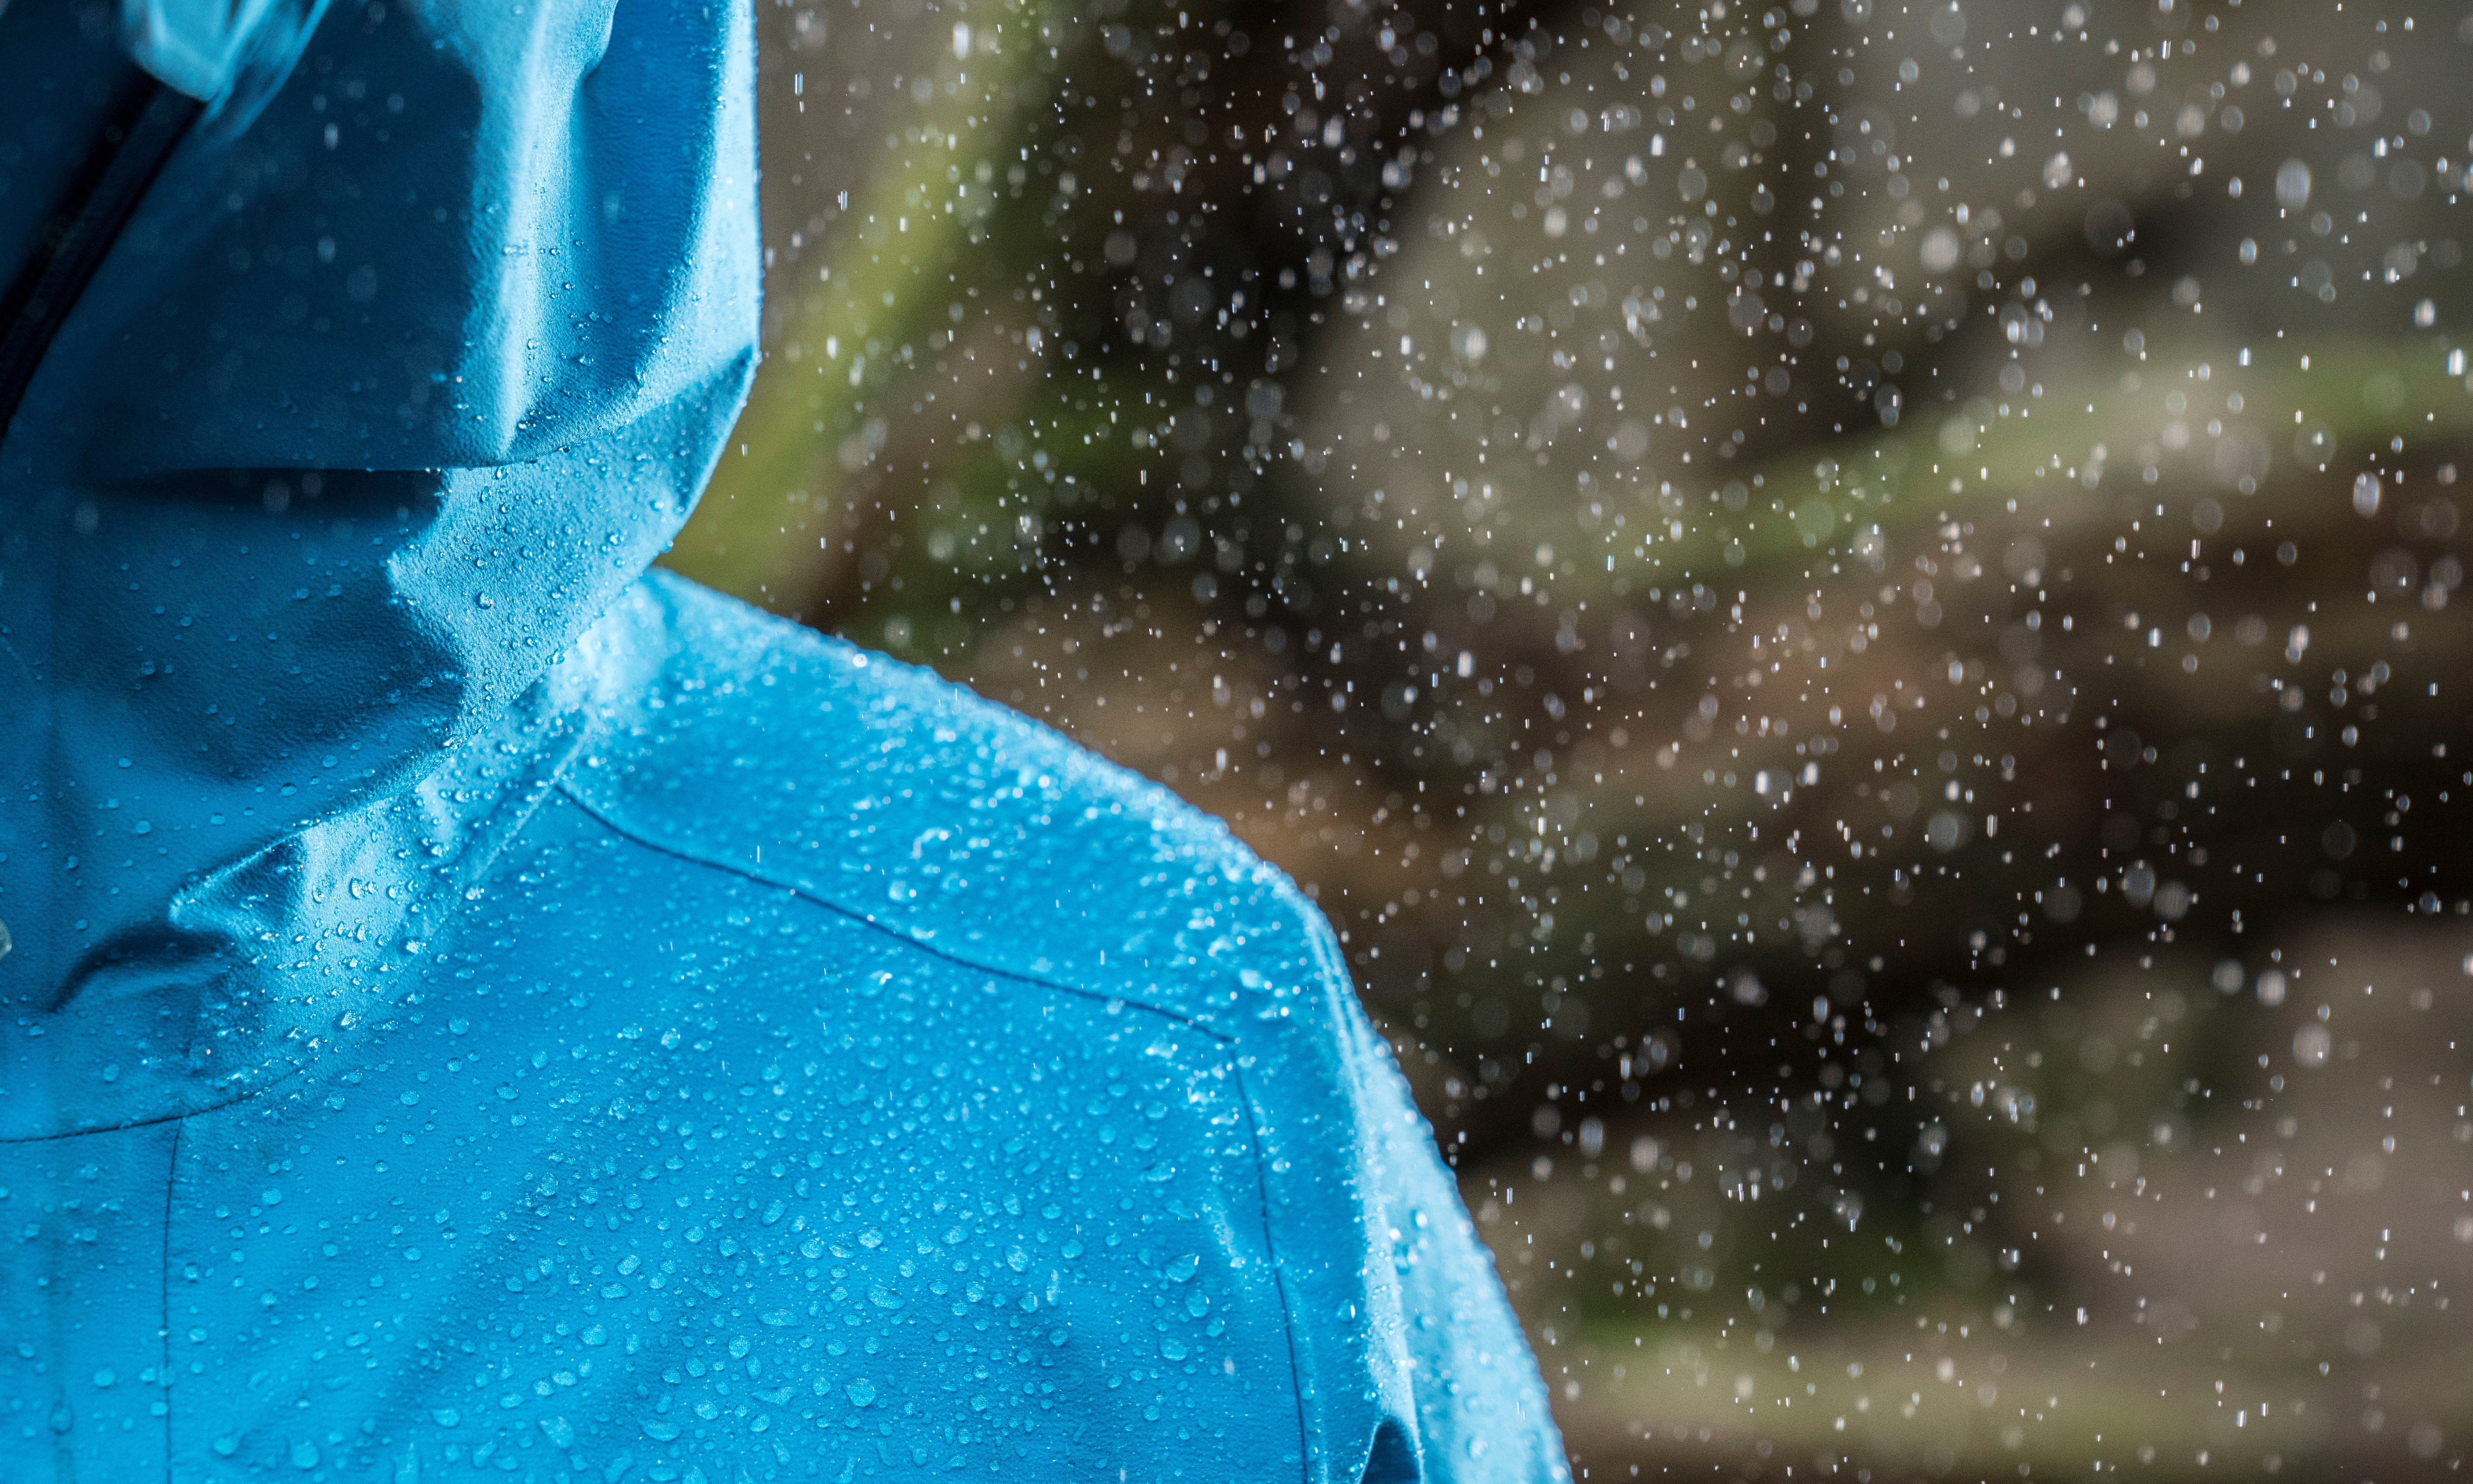 Waterproofing a Raincoat Is Easy, Here's How to Do It at Home